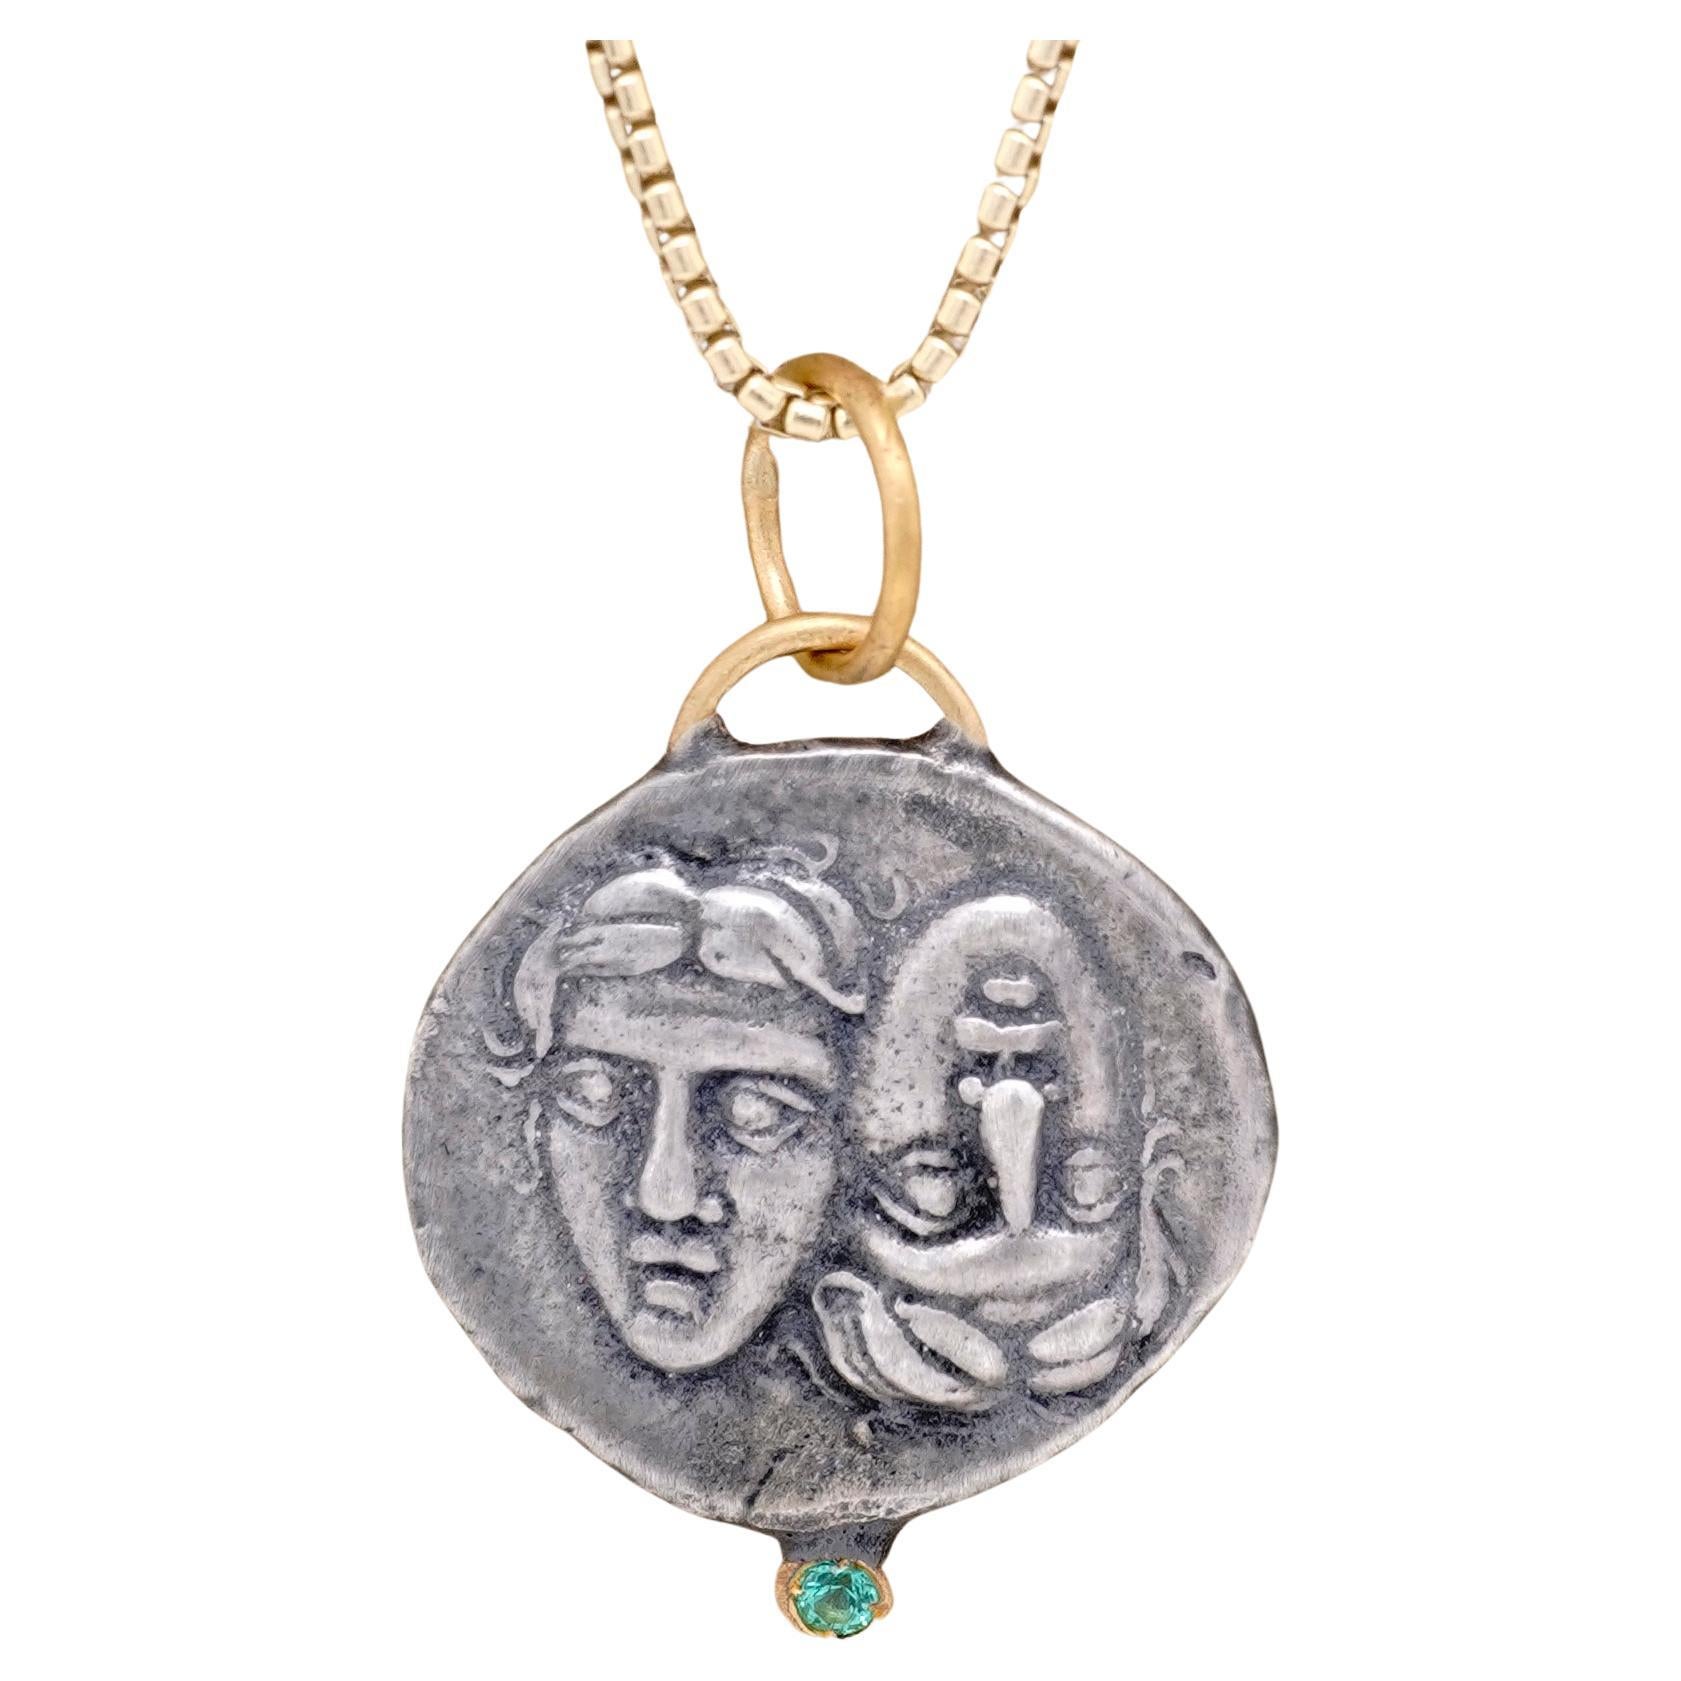 Astros Coin Charm Amulet Pendant Necklace with Emerald, 24kt Gold and Silver by Prehistoric Works of Istanbul, Turkey. Emerald - 0.03cts. These coin amulets pair well alone or with other coin pendants or with miniature pendants. Measures: 18.7mm x